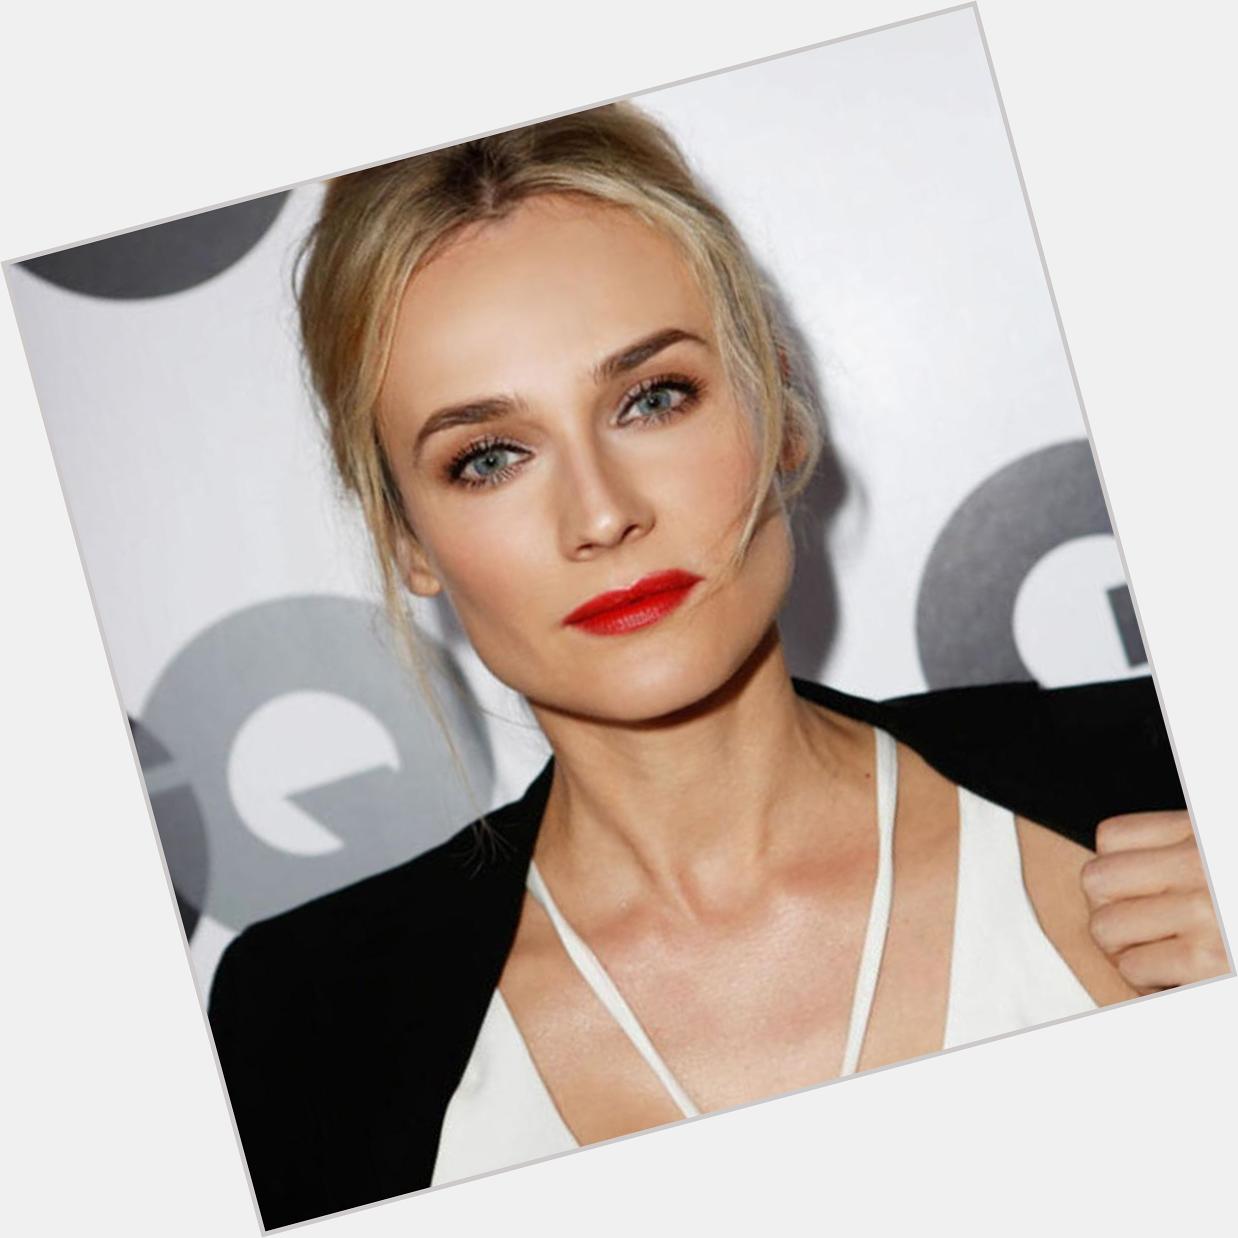 Happy Birthday to a red carpet queen, Diane Kruger! Always such a babe 